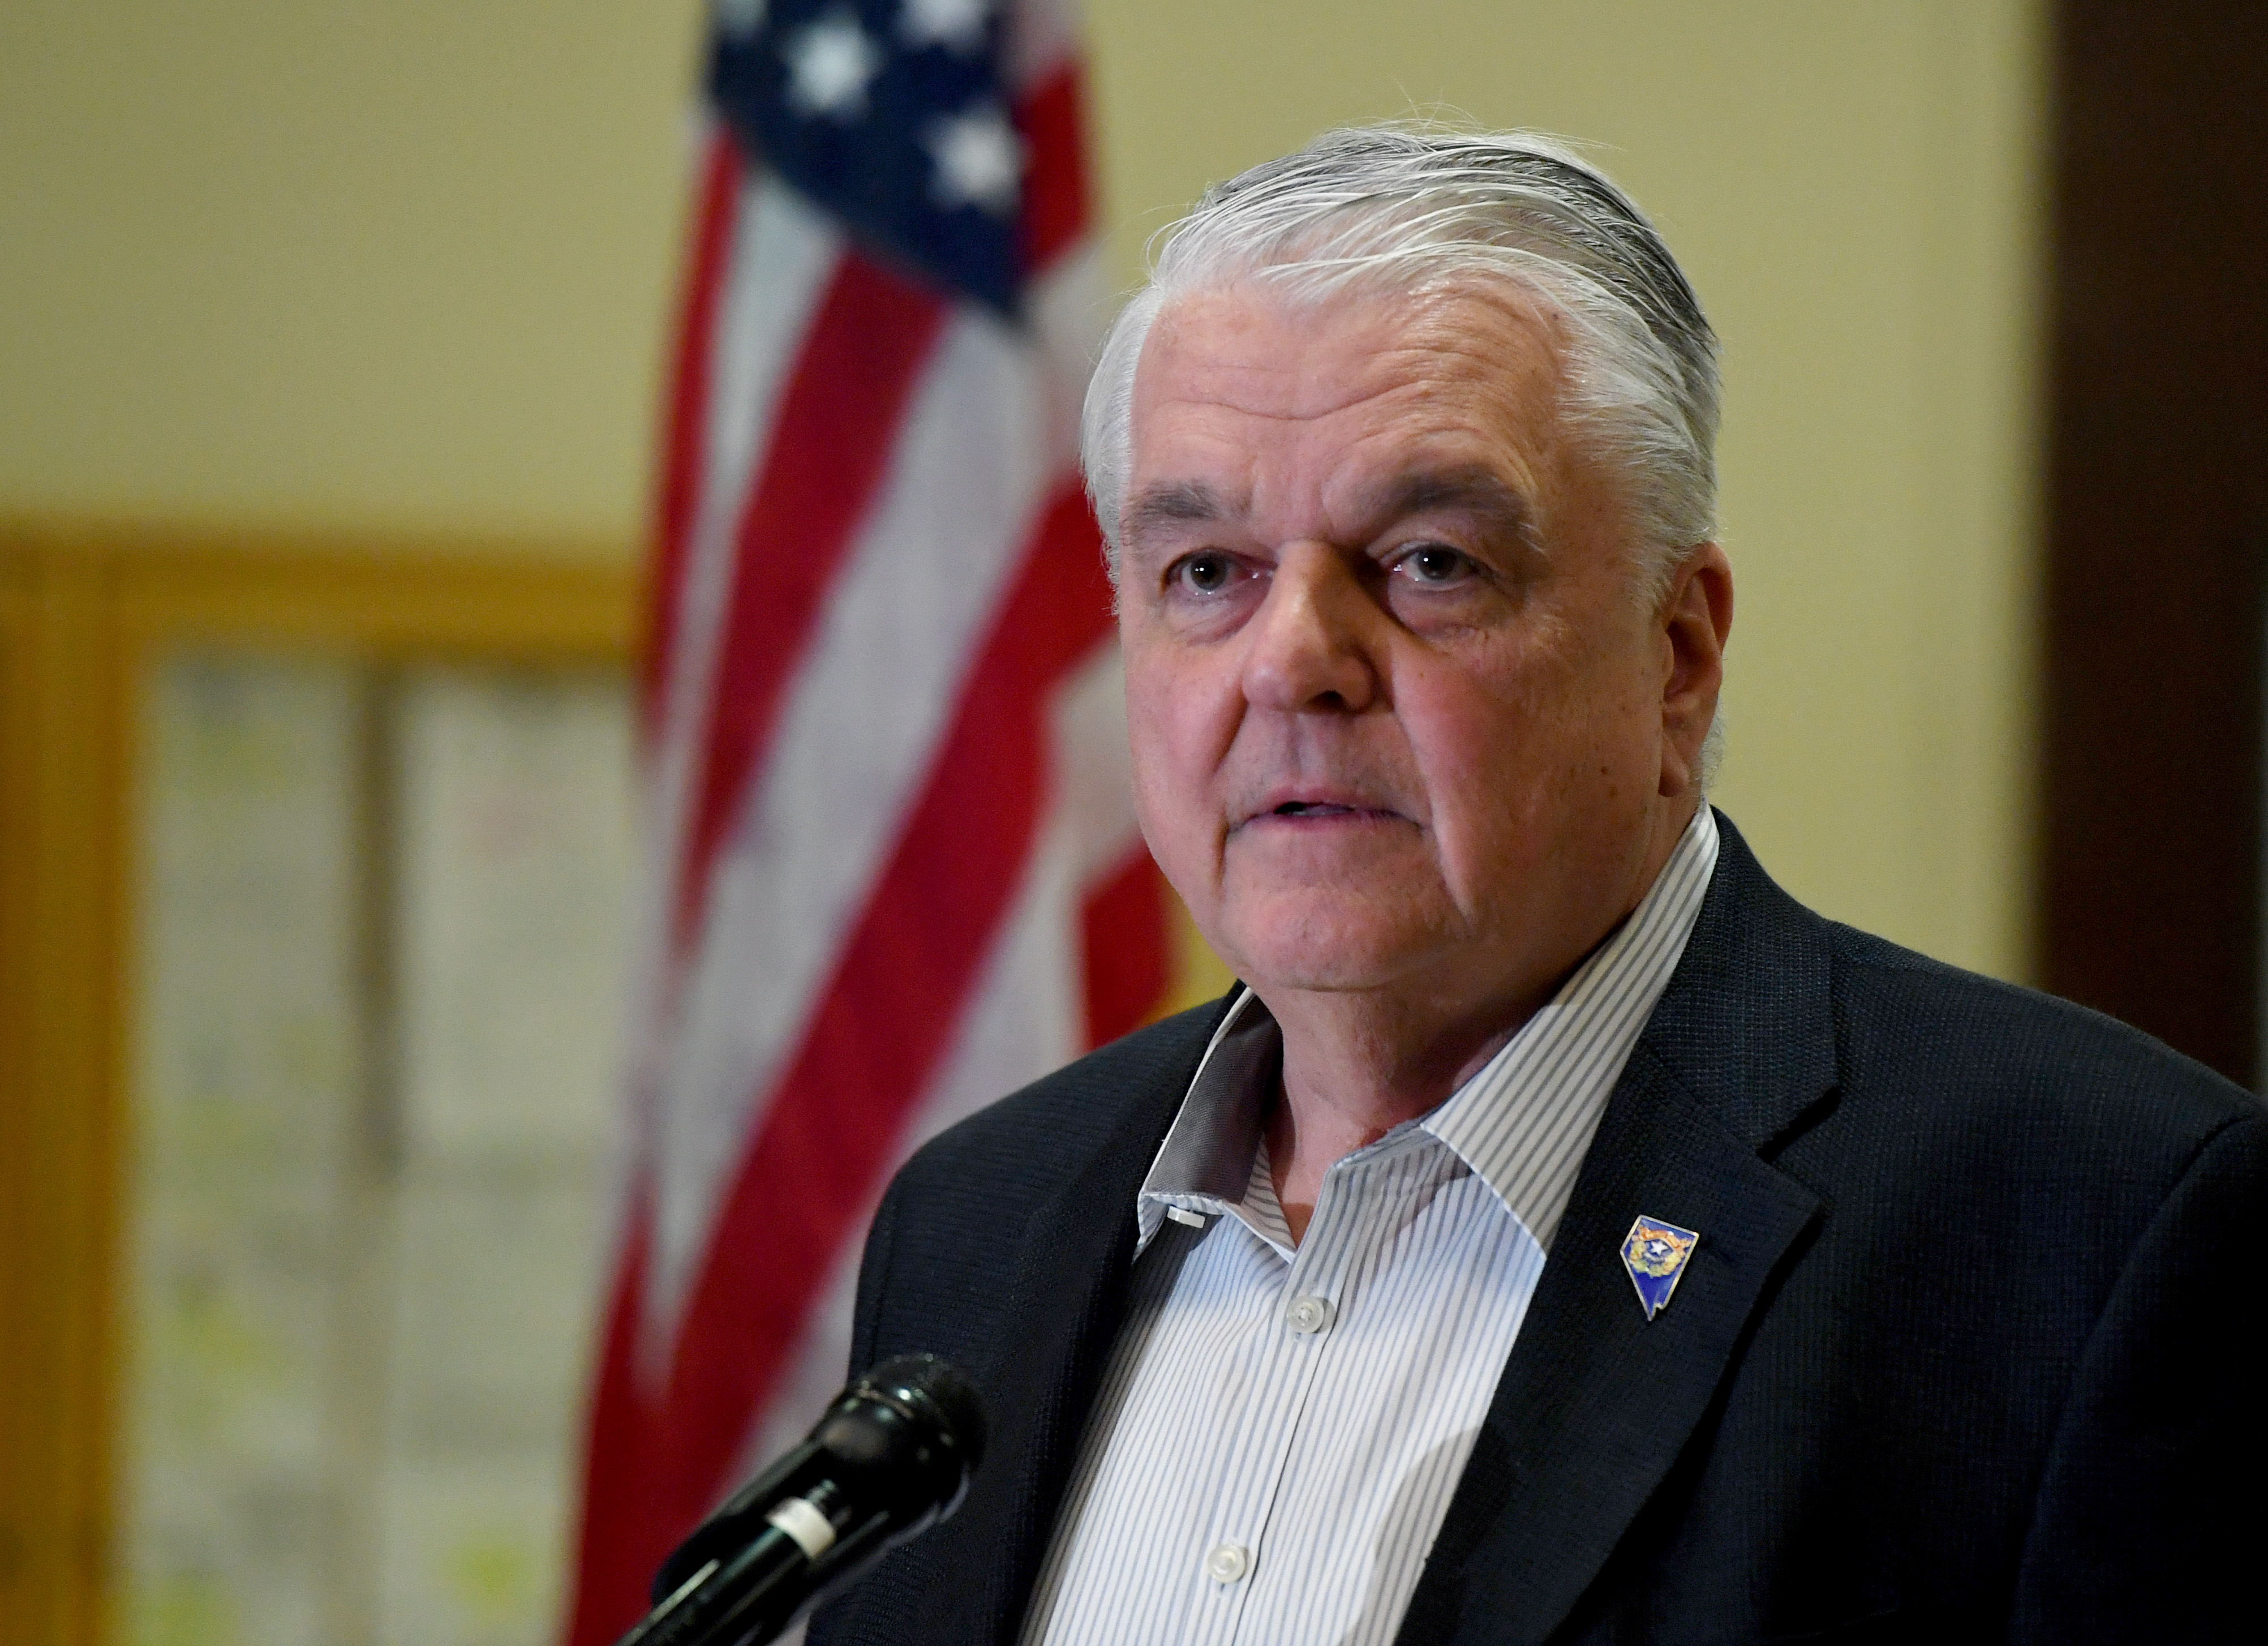 Nevada Gov. Steve Sisolak speaks during a news conference in Las Vegas on March 17.